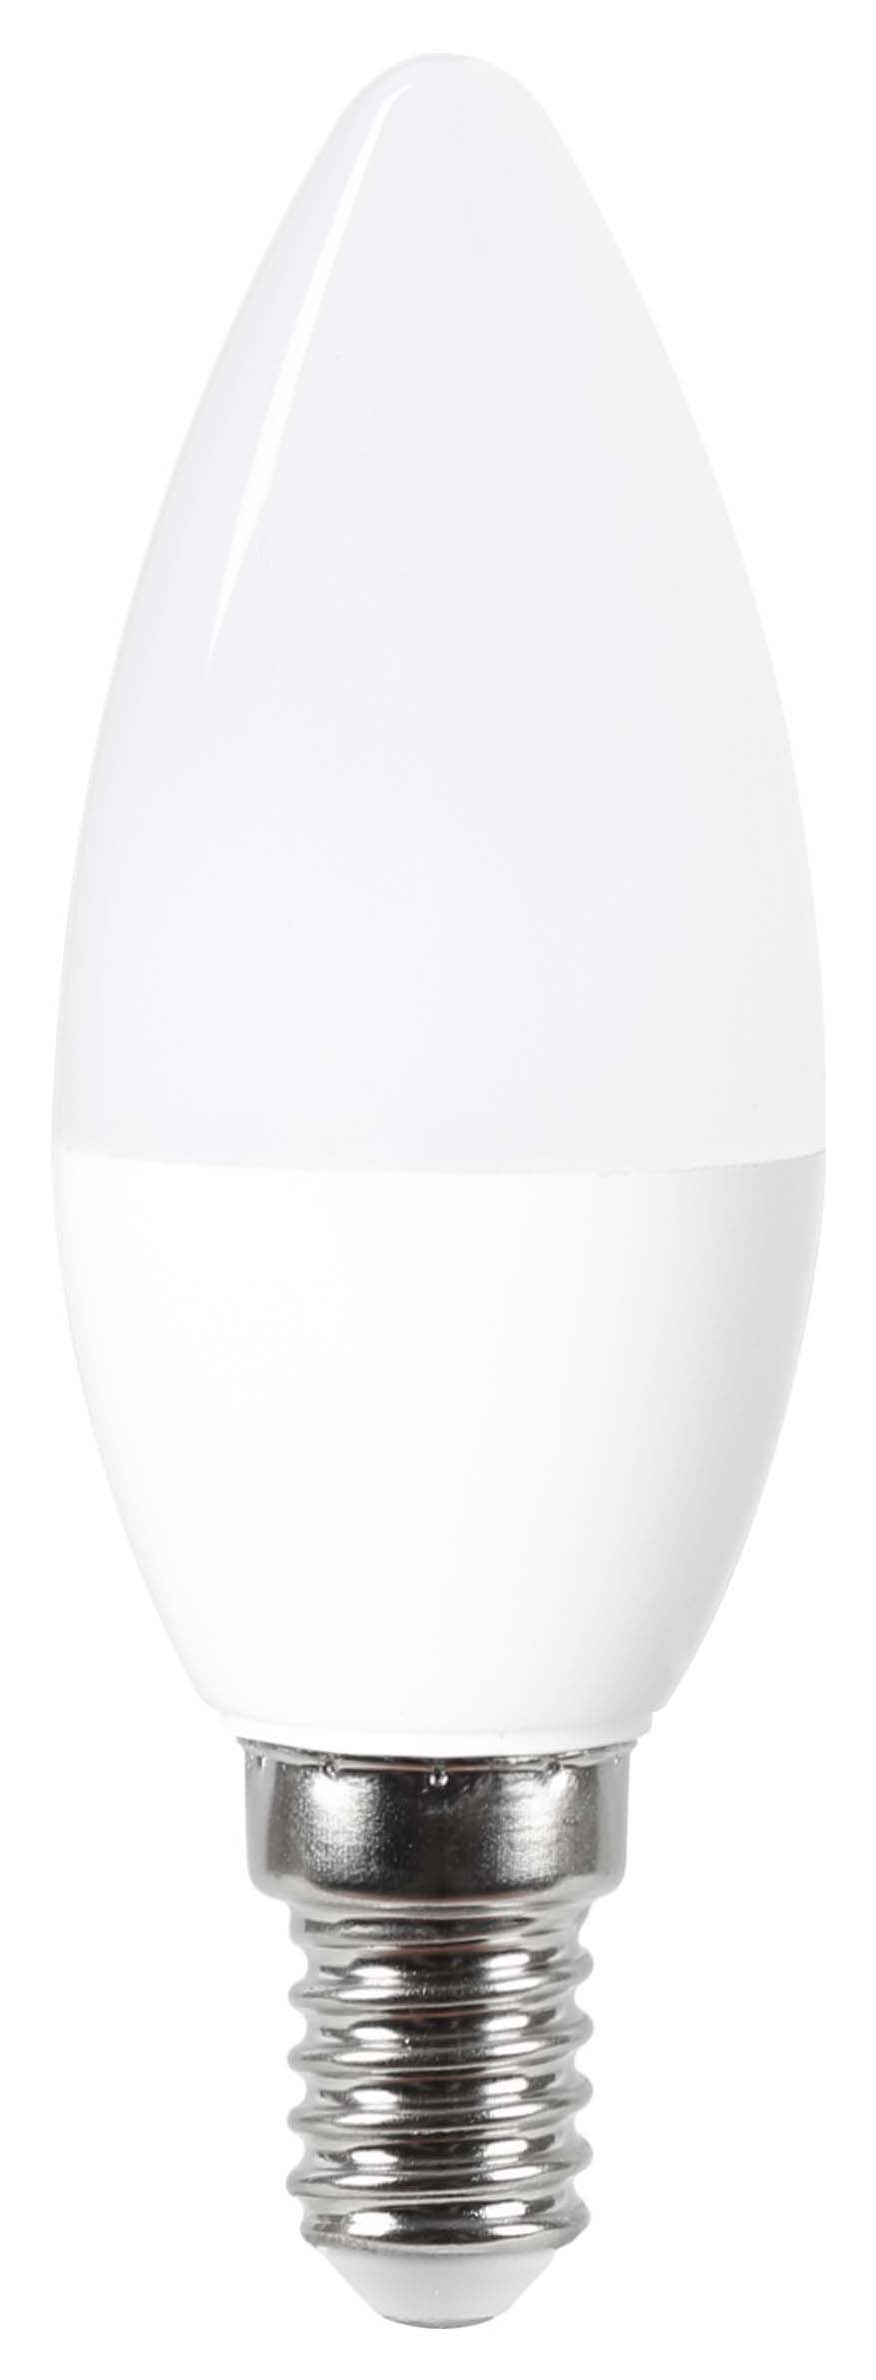 Wickes Non-Dimmable LED E14 Candle 4.9W Warm White Light Bulb - Pack of 4